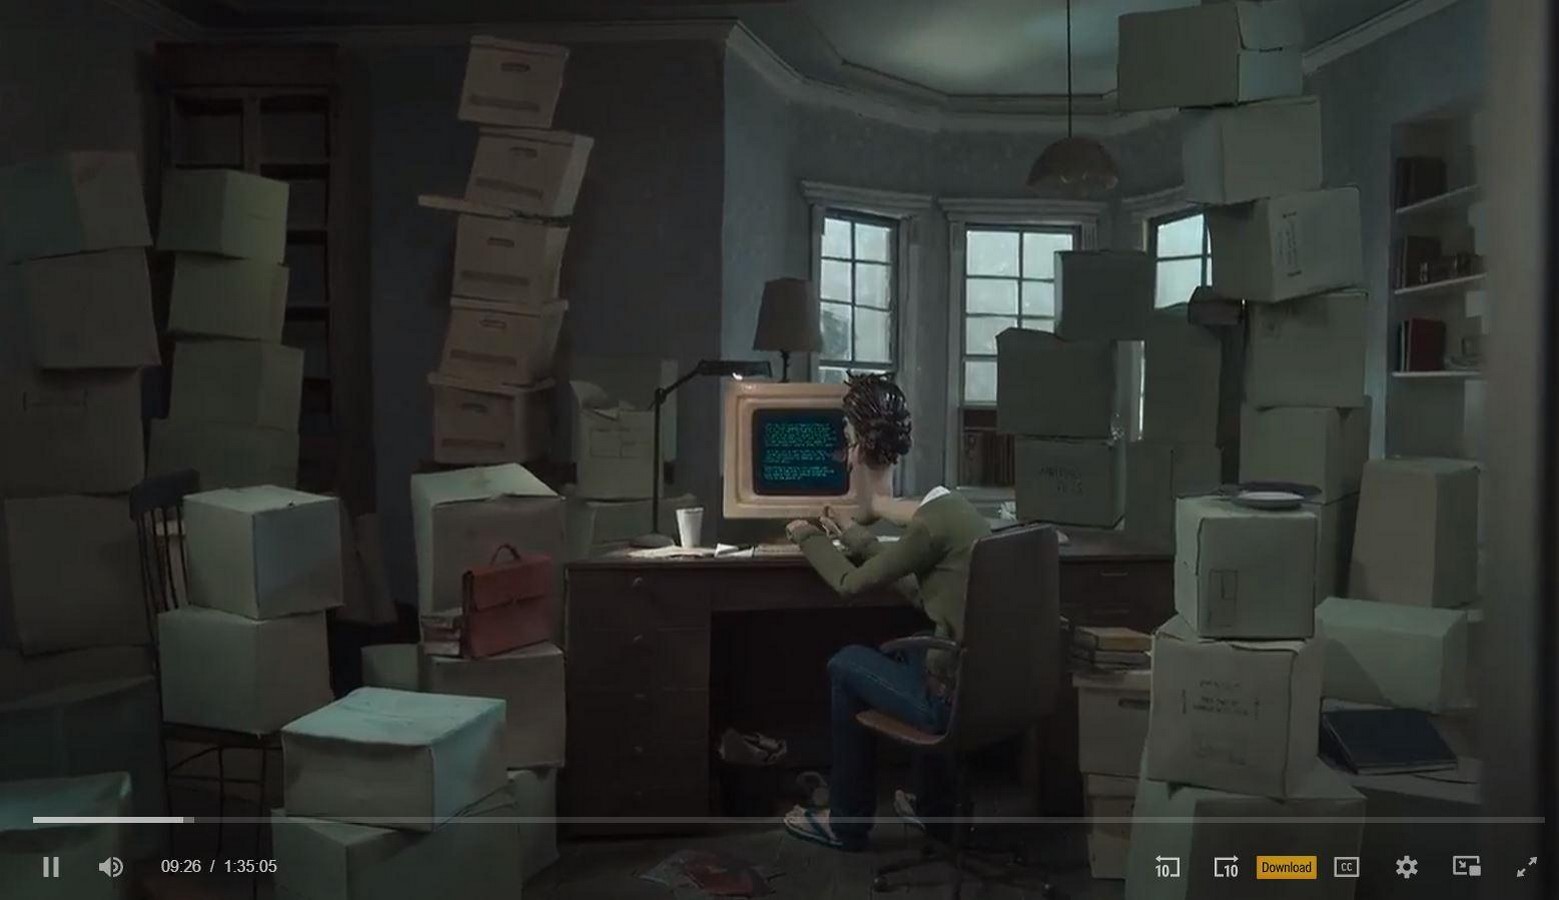 Coraline’s dad’s study looks shabby in the real world. Source_ fmovies.hn